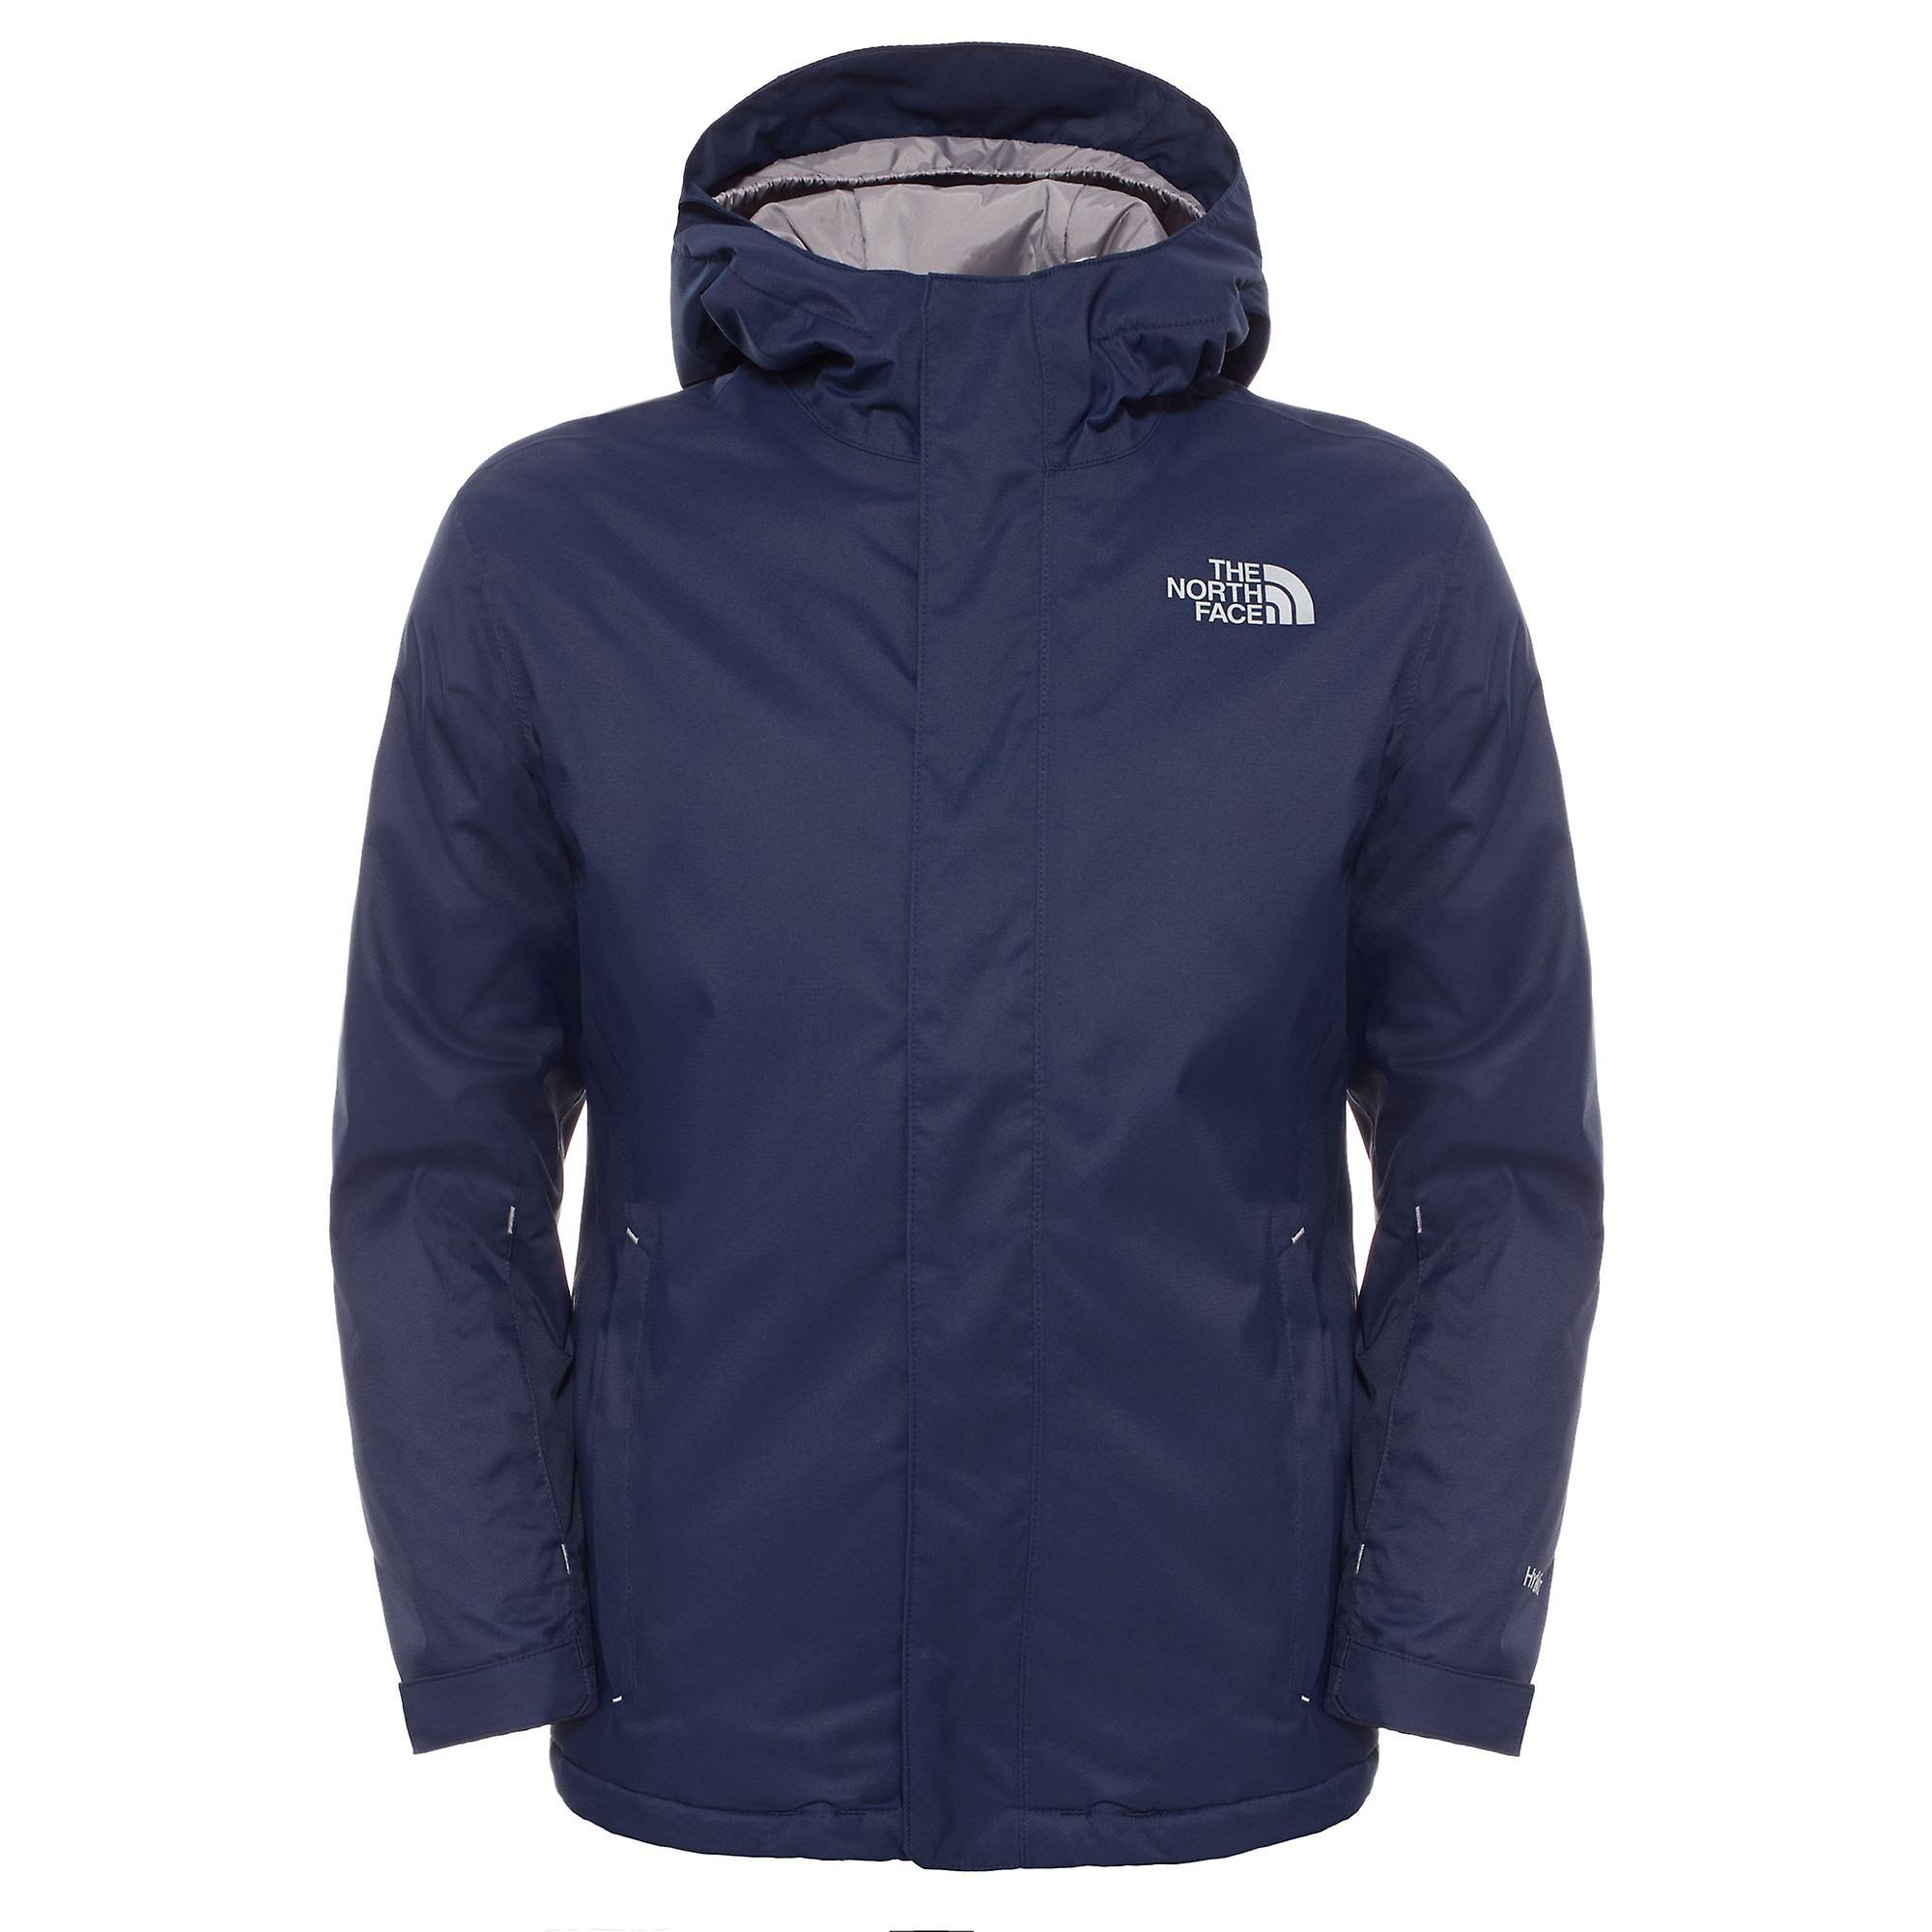 The North Face Boys Snow Quest Jacket - Cosmic Blue, Small